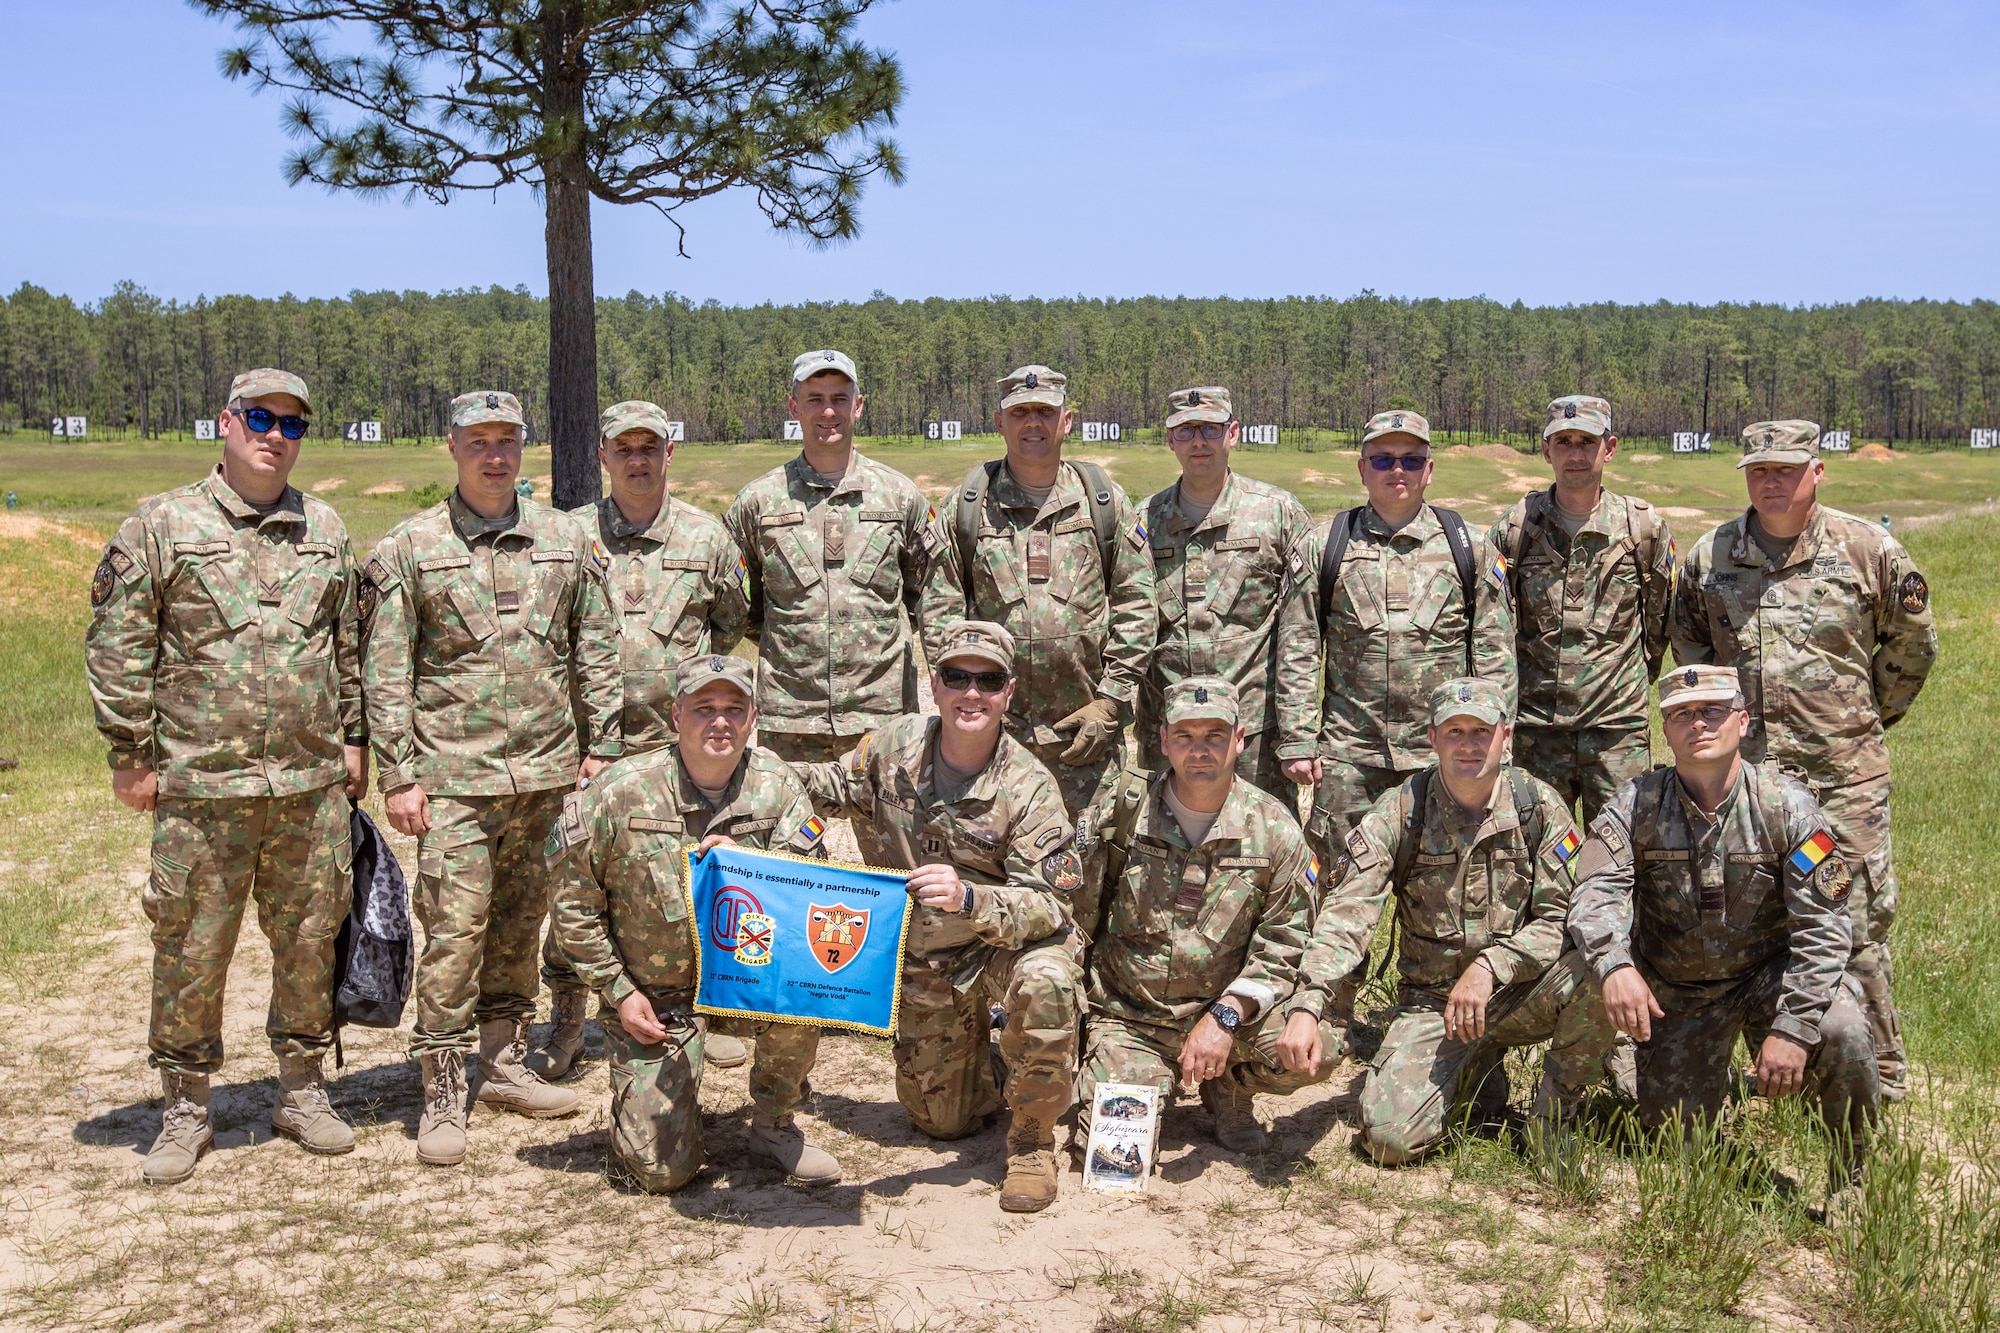 Soldiers from the Alabama National Guard's 31st CBRN Brigade and Romania's 72nd NBC Defense Battalion trained on tactics, techniques, procedures and equipment at Camp Shelby, Mississippi, April 24-30, 2022.